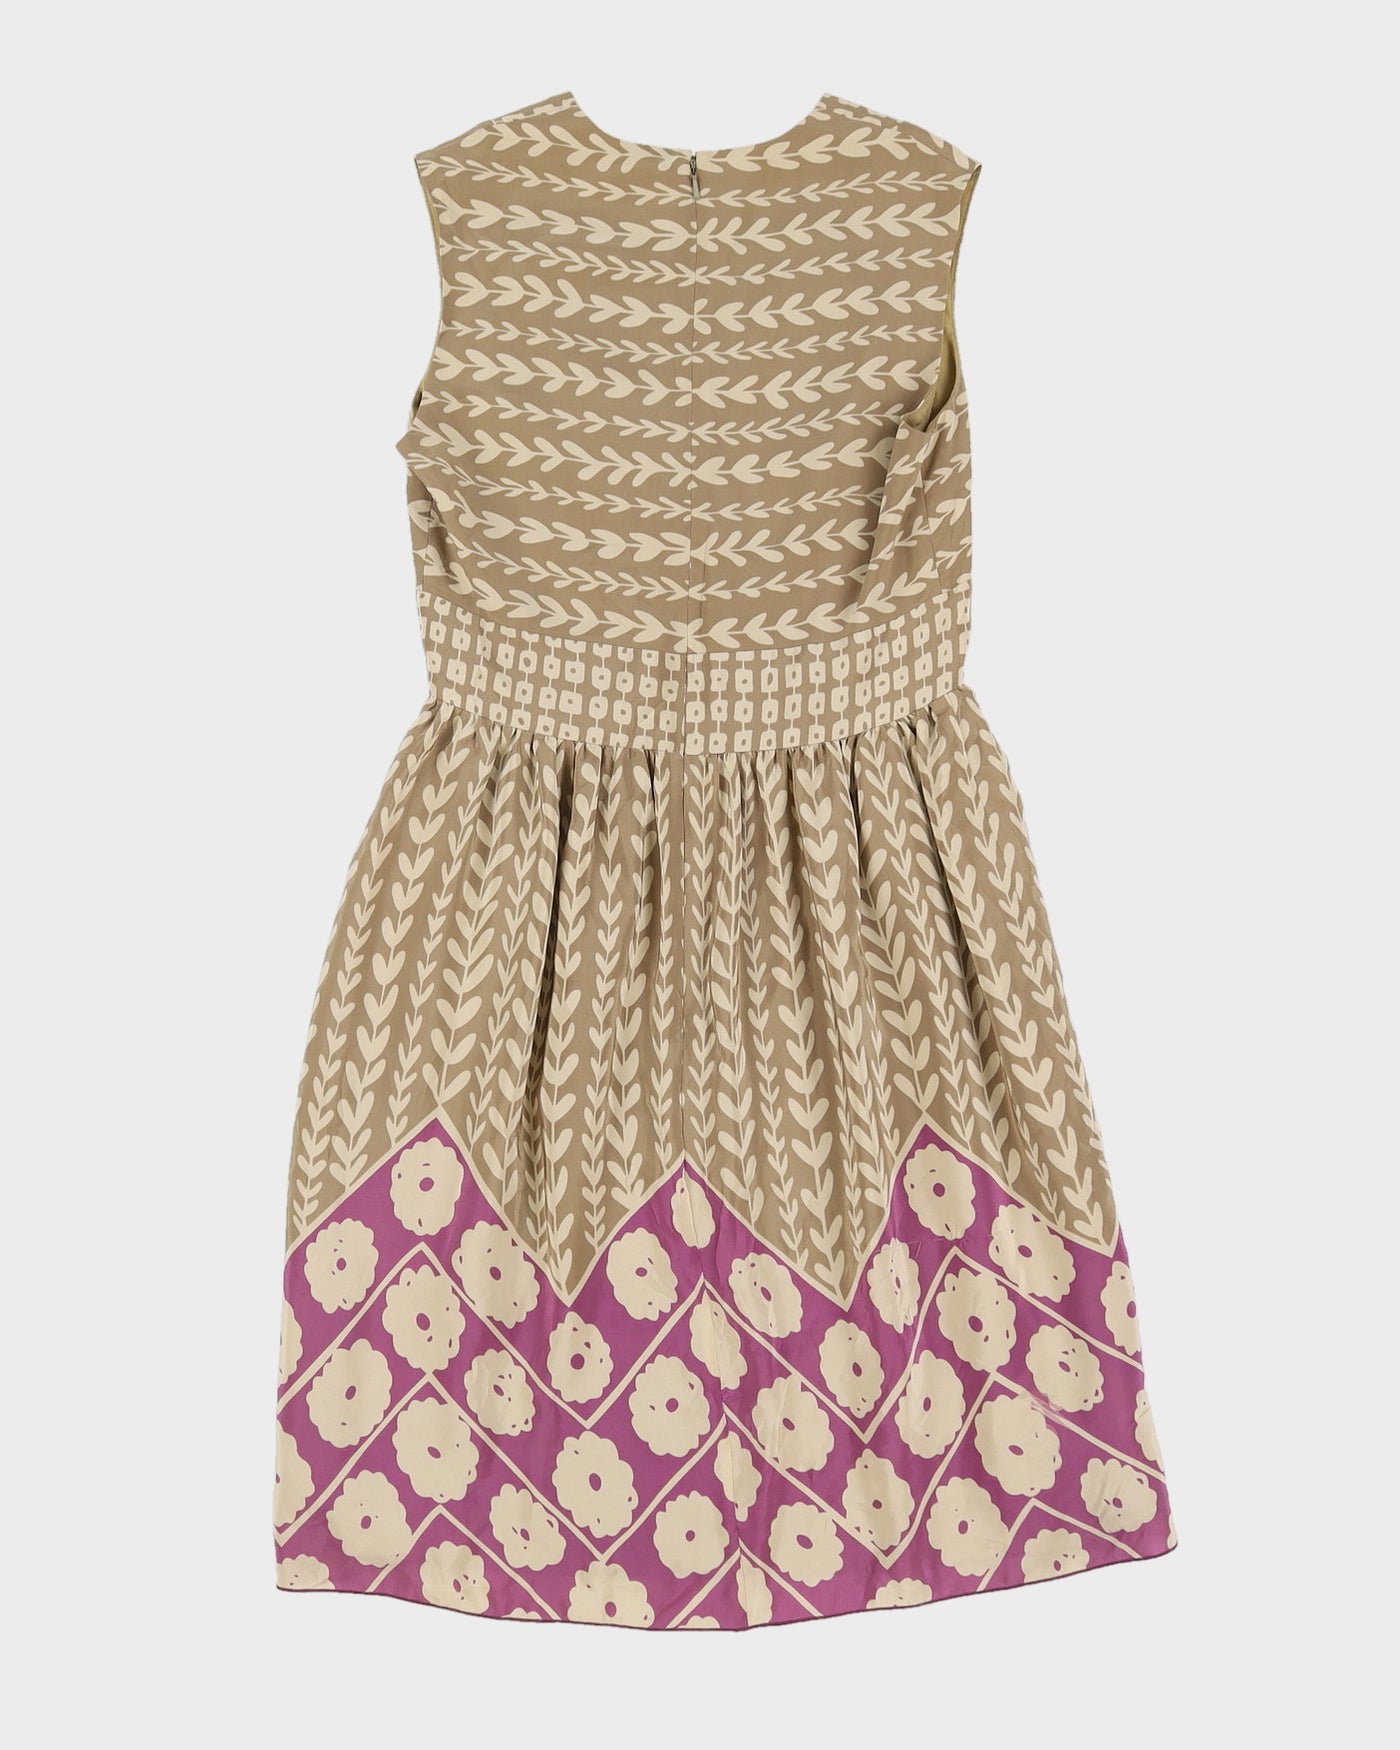 Anna Sui For Anthropologie Silk Dress - S